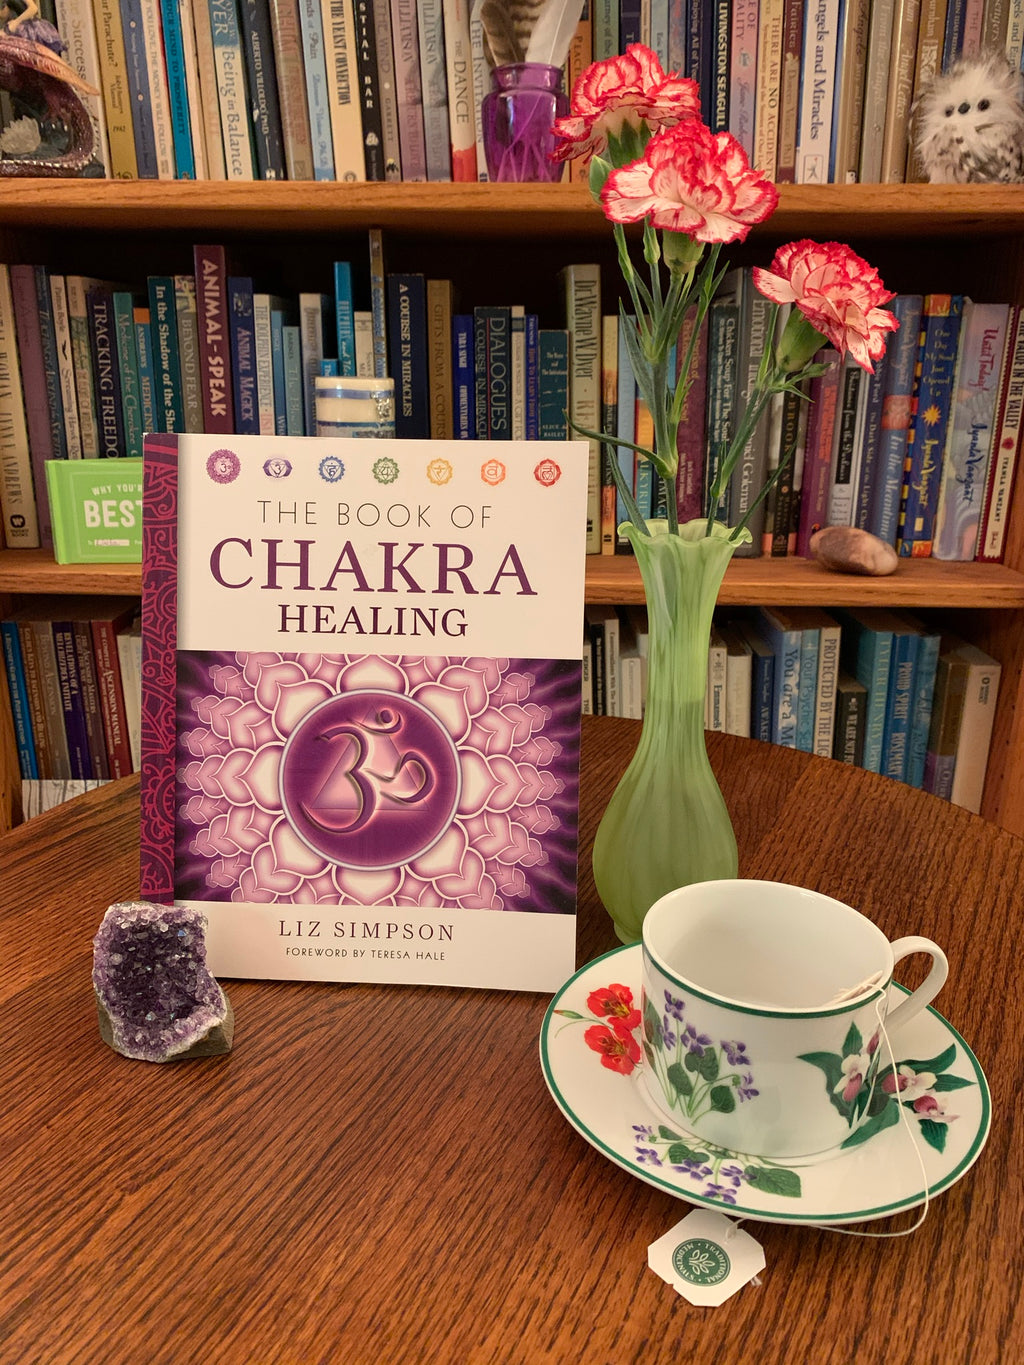 The Book of Chakra Healing by Liz Simpson is a "comprehensive guide to the ancient Indian System of chakras." Chakras are energy centers in our bodies that process energy - coming into and flowing out of the body. Simpson discusses each of the chakras and how to unblock them and move into a more balanced energy. Liz Simpson is a journalist and author who focuses on alternative healing and personal development. She writes for many national and international magazines as well. Cost is $14.95.